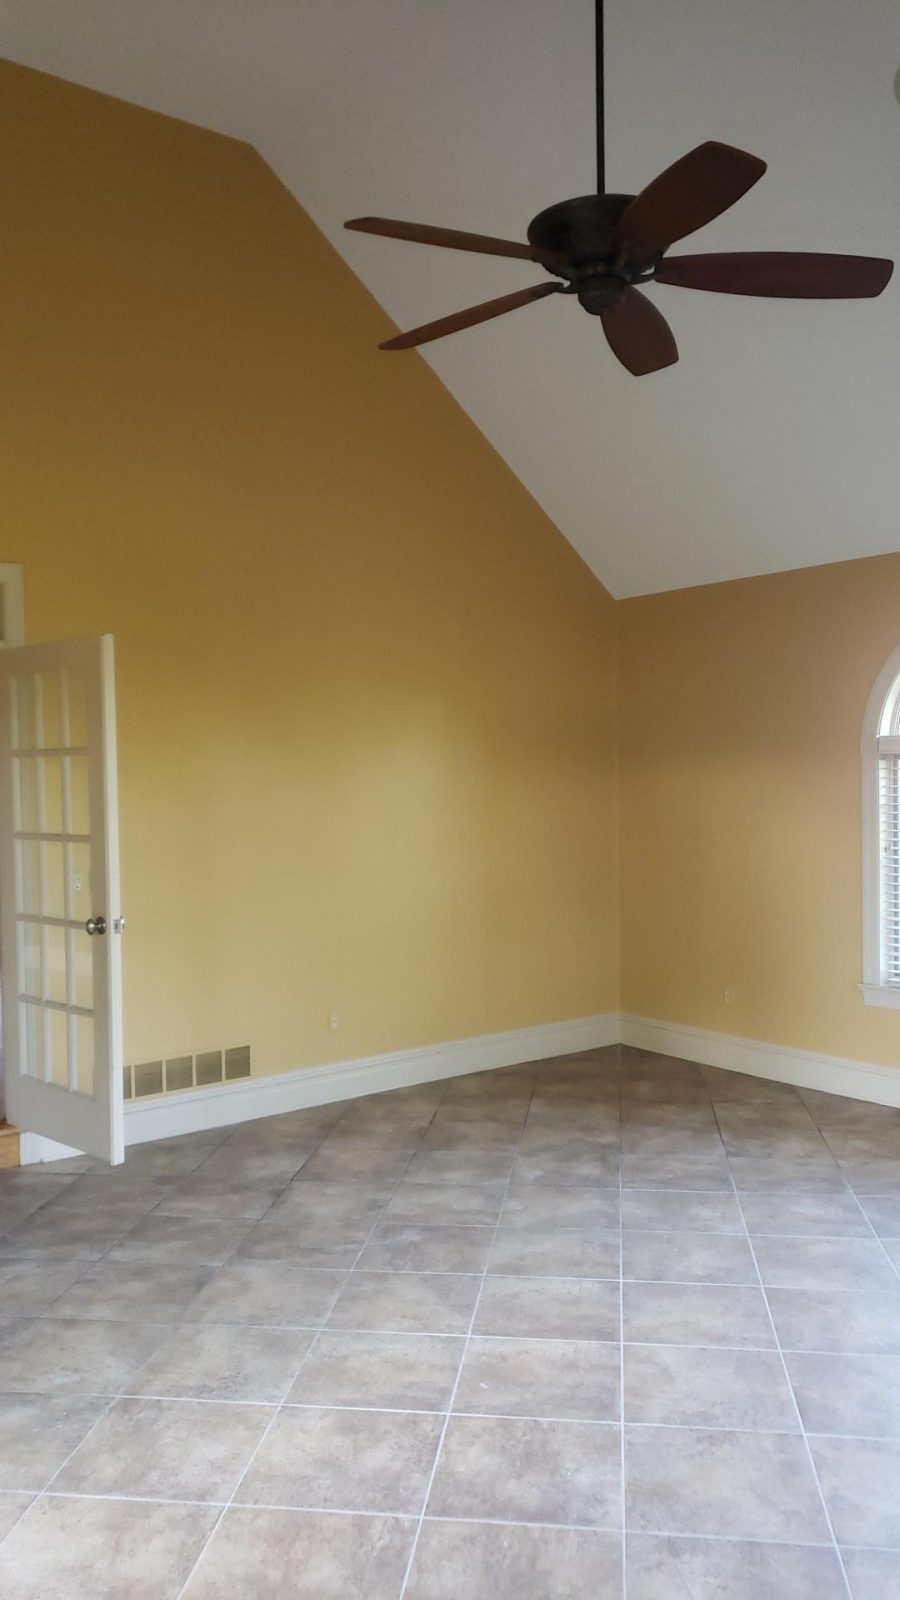 Beige Walls and White Door in Easton, PA, after completed residential interior painting project by CertaPro Painters of the Greater Lehigh Valley